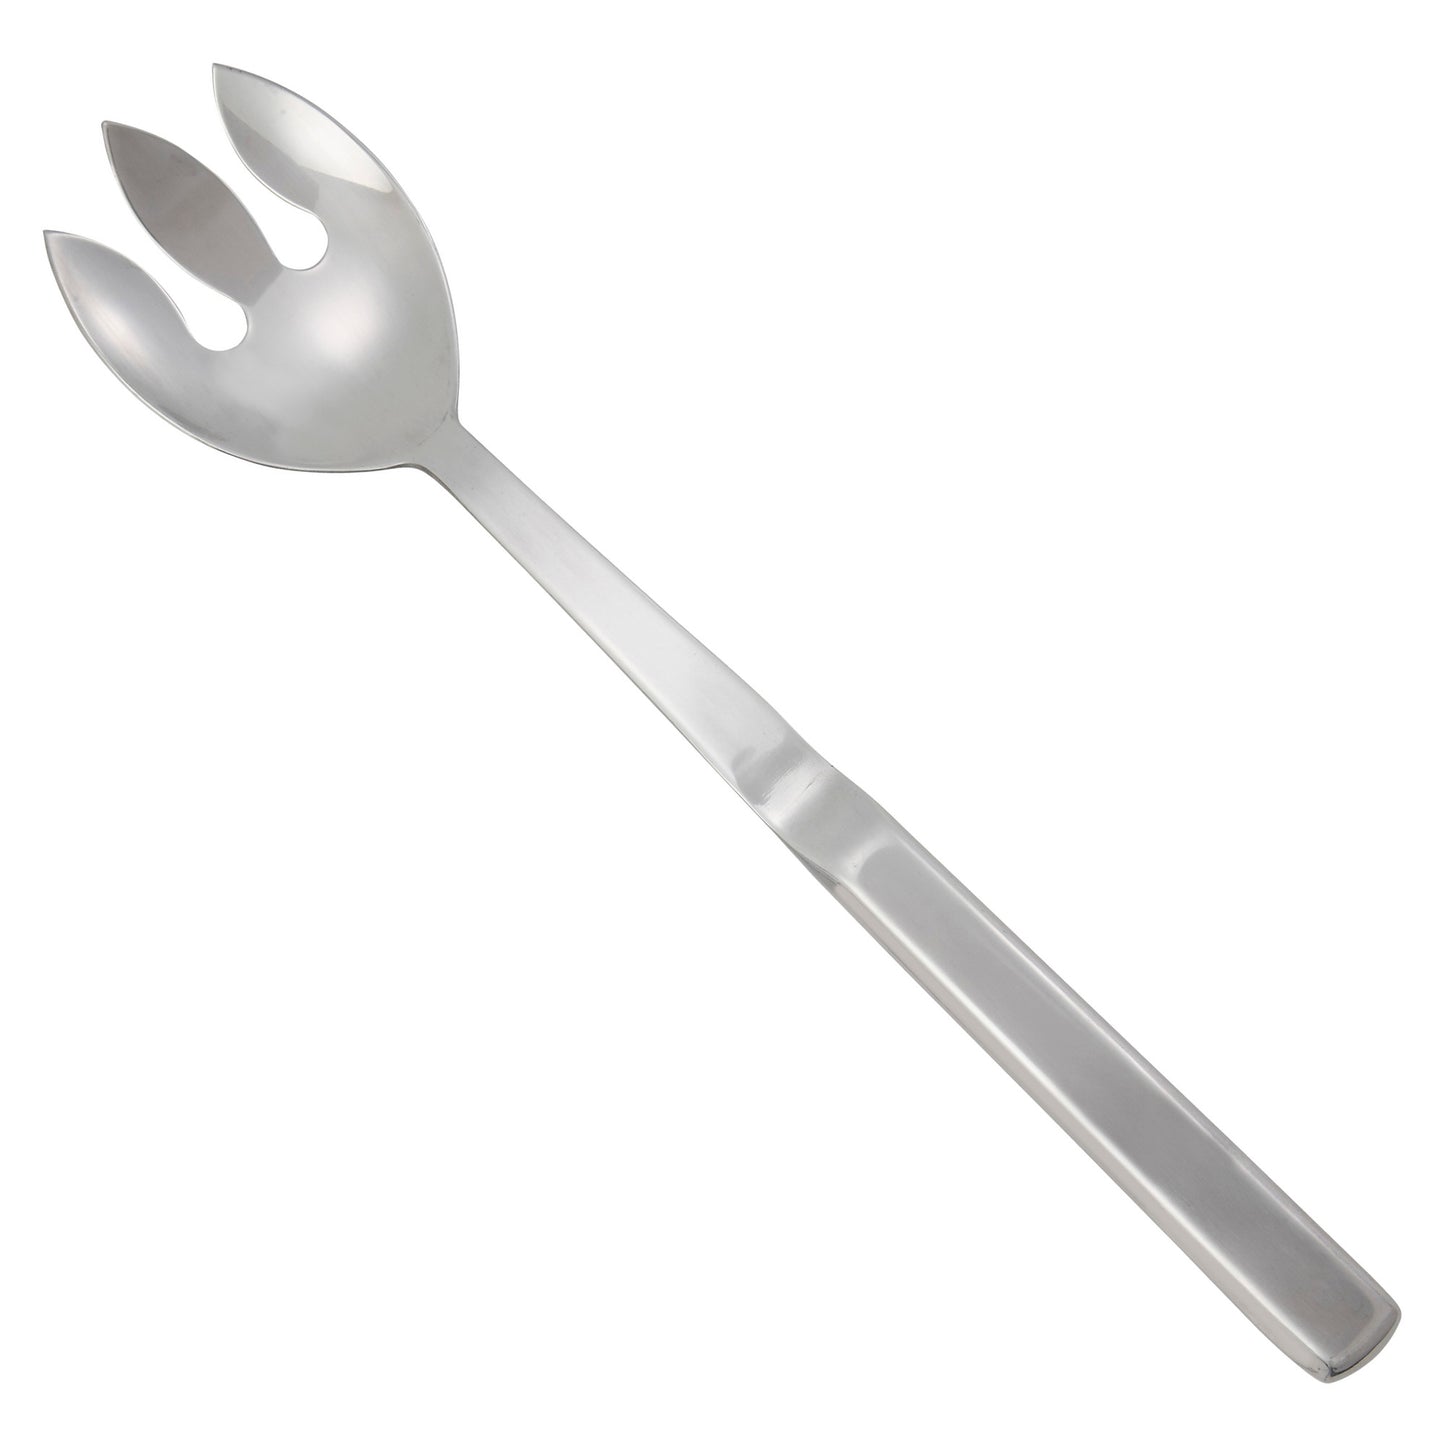 BW-NS3 - 11-3/4" Notched Spoon, Hollow Handle, Stainless Steel